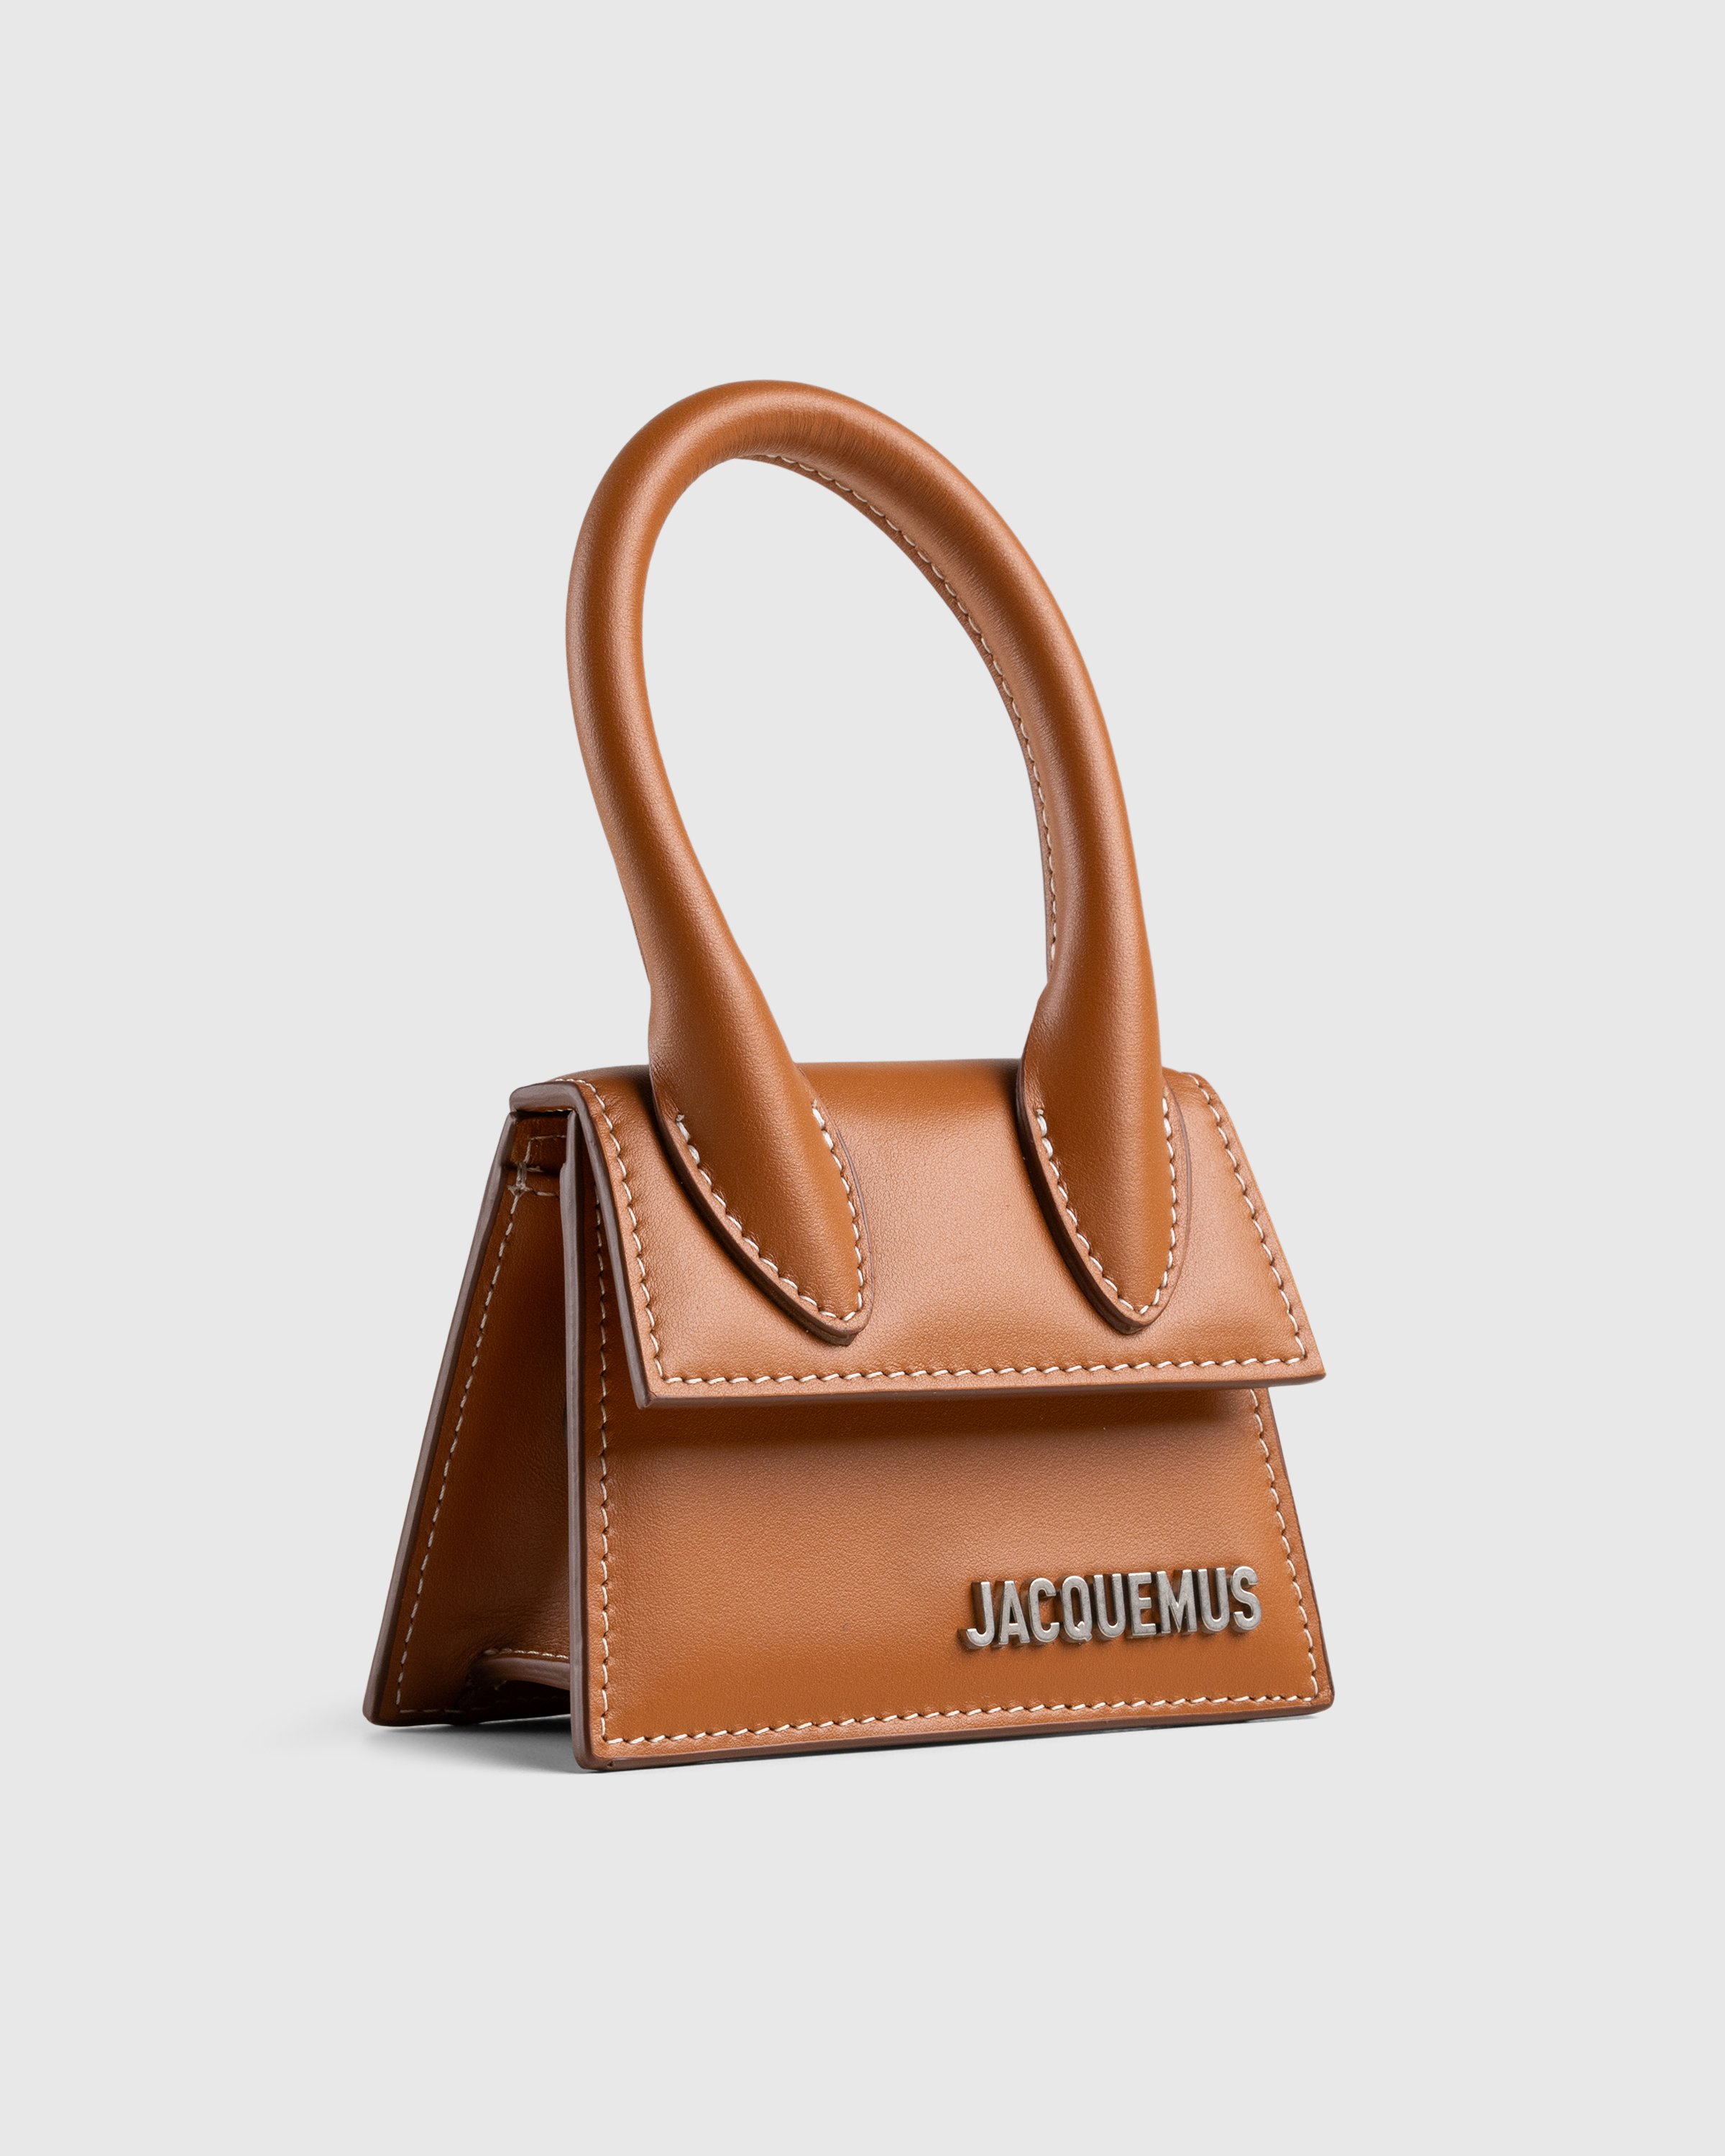 JACQUEMUS - LE CHIQUITO HOMME - Accessories - Brown - Image 7